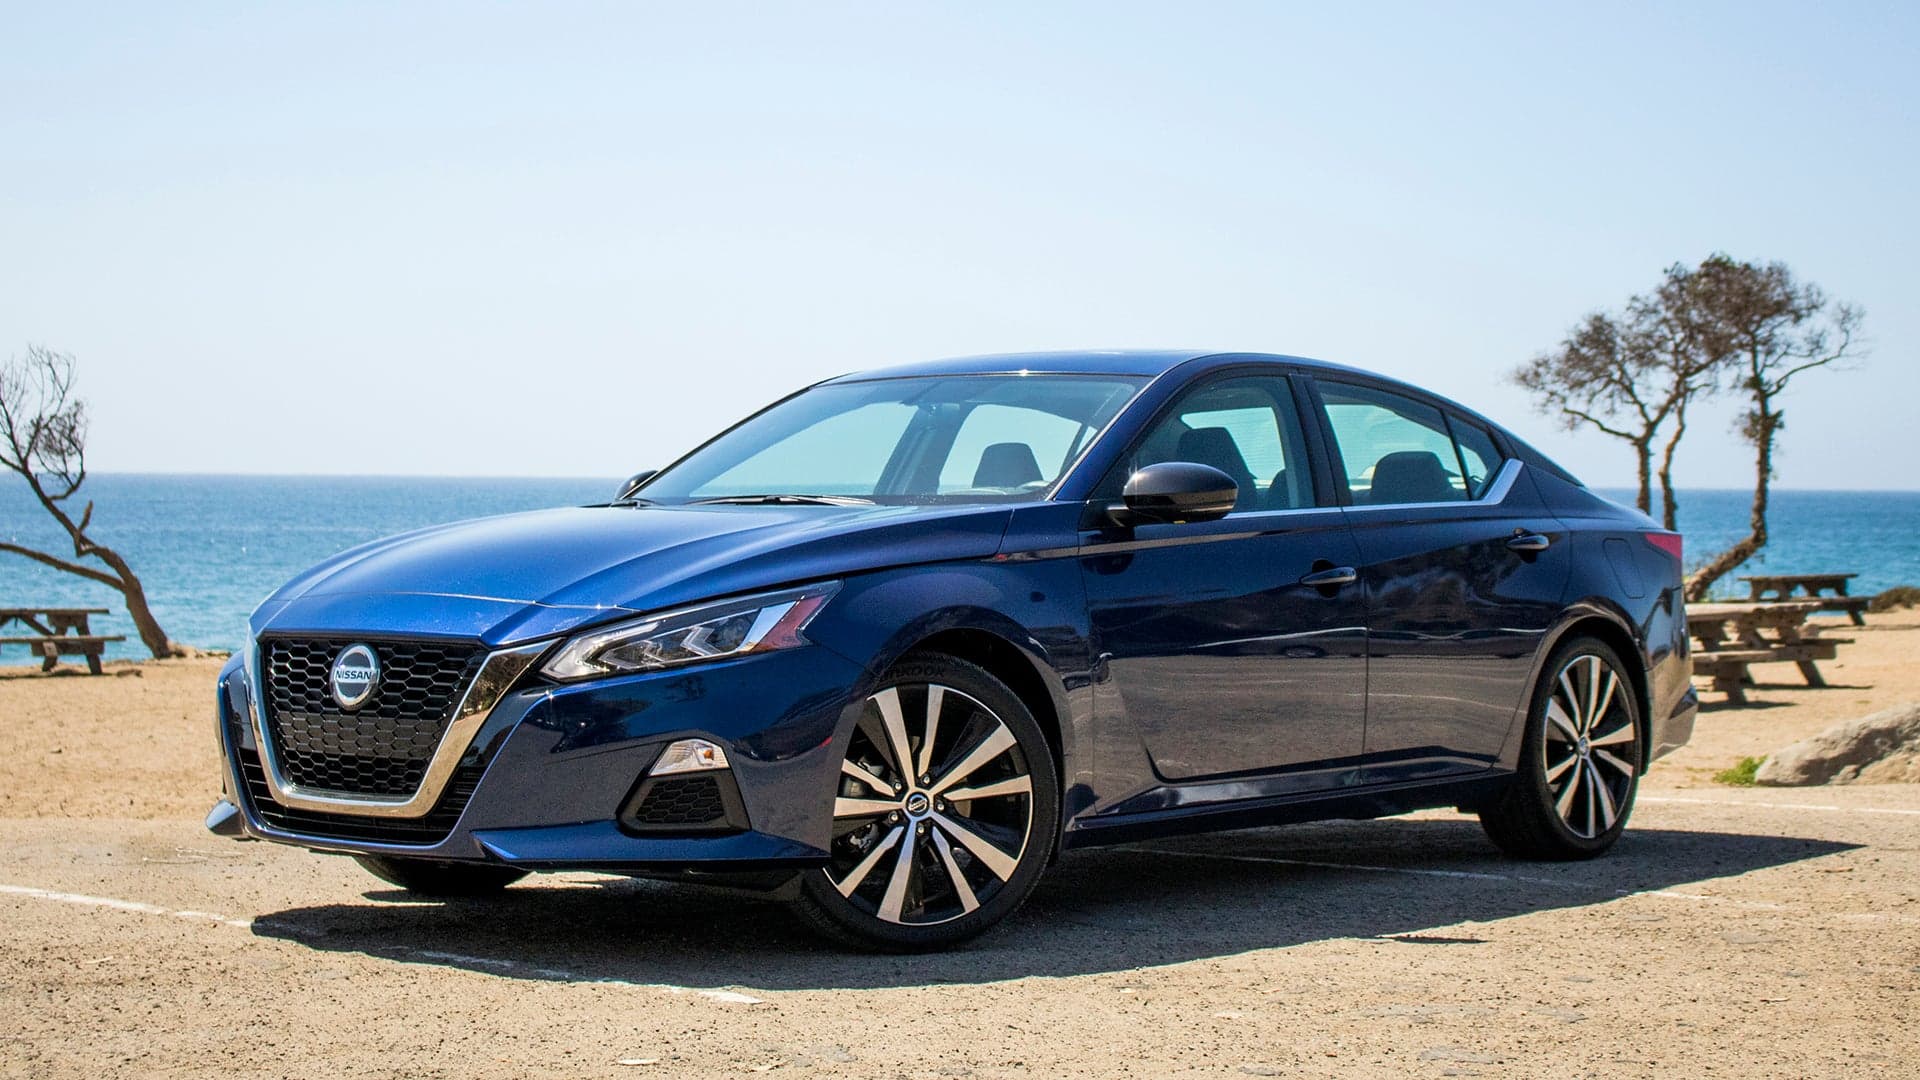 2019 Nissan Altima First Drive Review: A Major Leap Forward, With Room for Improvement